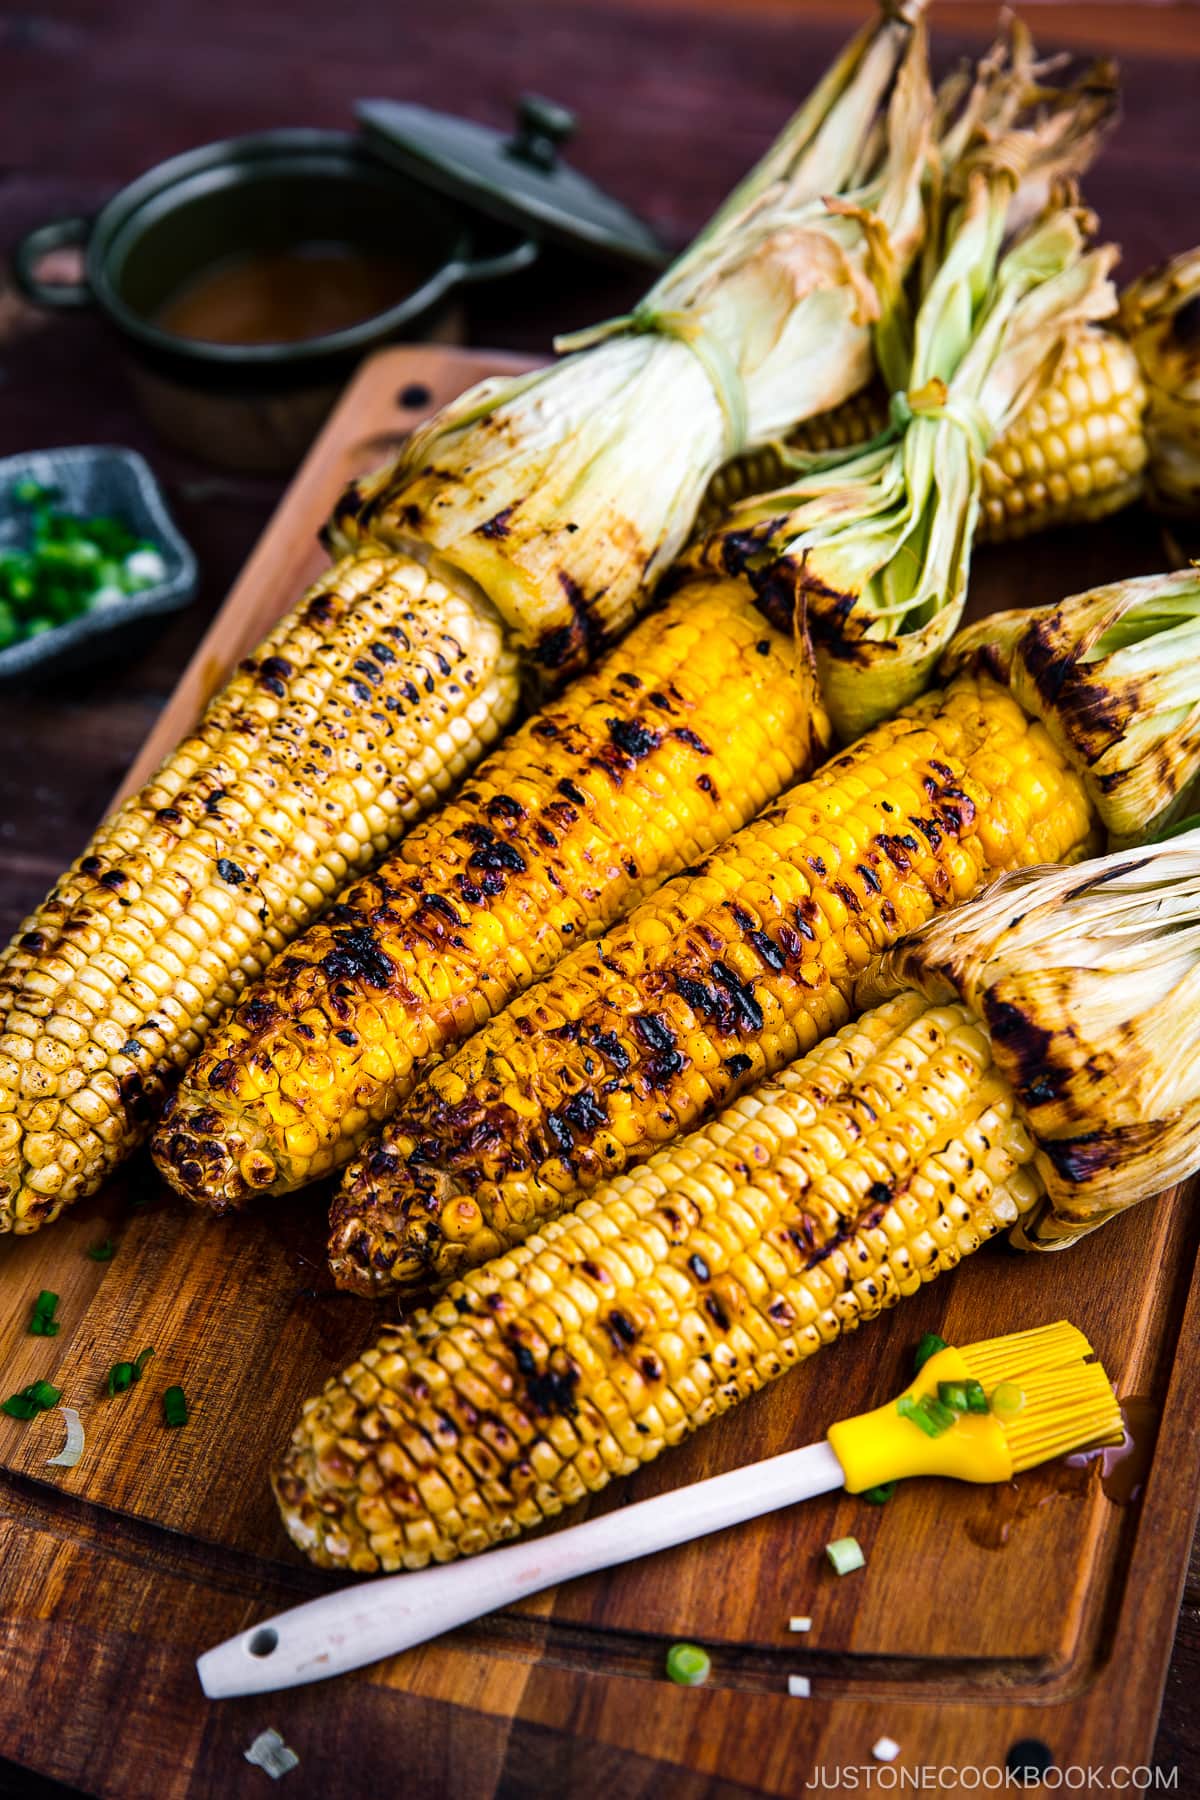 Grilled corn on the wooden cutting board.